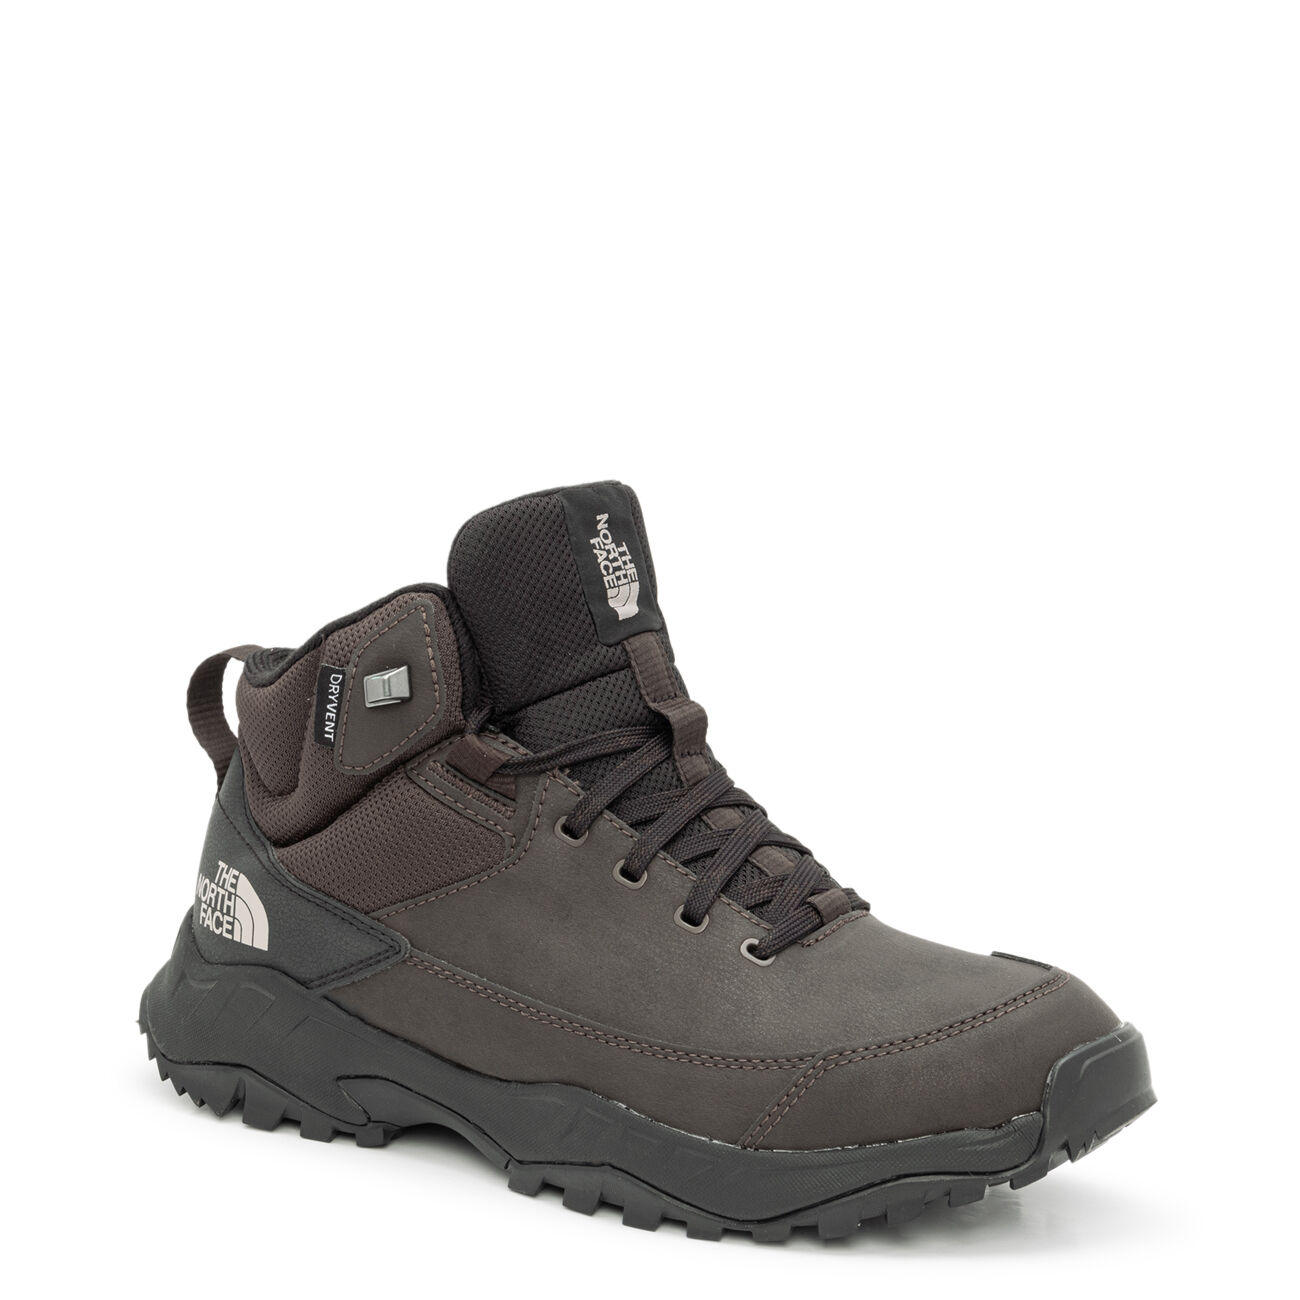 The North Face Men's Storm Strike III Waterproof Trail Hiking Boot in Coffee Brown Size 10 Medium